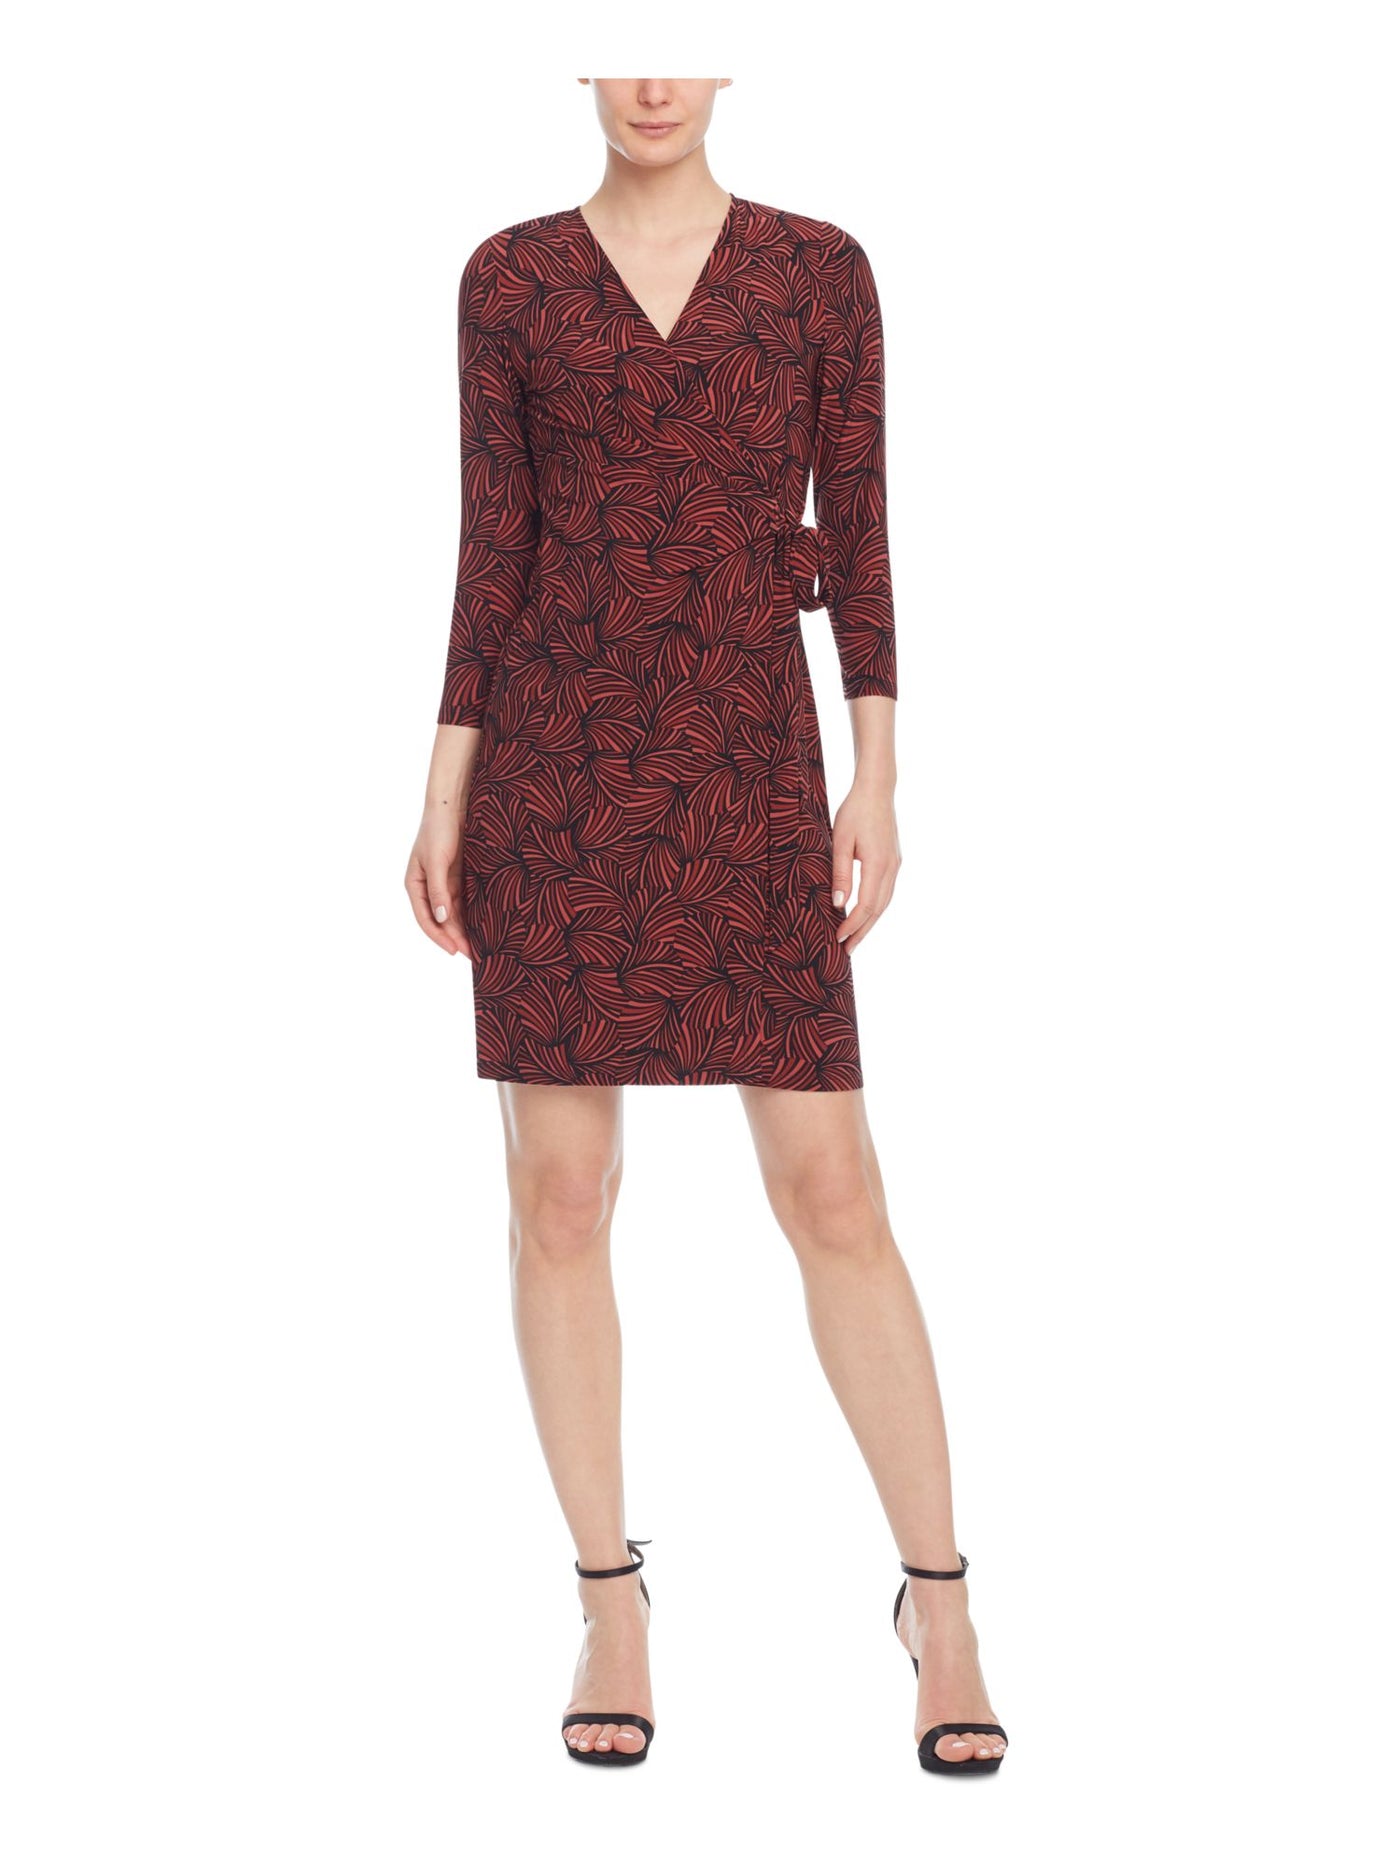 ANNE KLEIN Womens Red Stretch Tie Printed 3/4 Sleeve Surplice Neckline Above The Knee Cocktail Faux Wrap Dress S